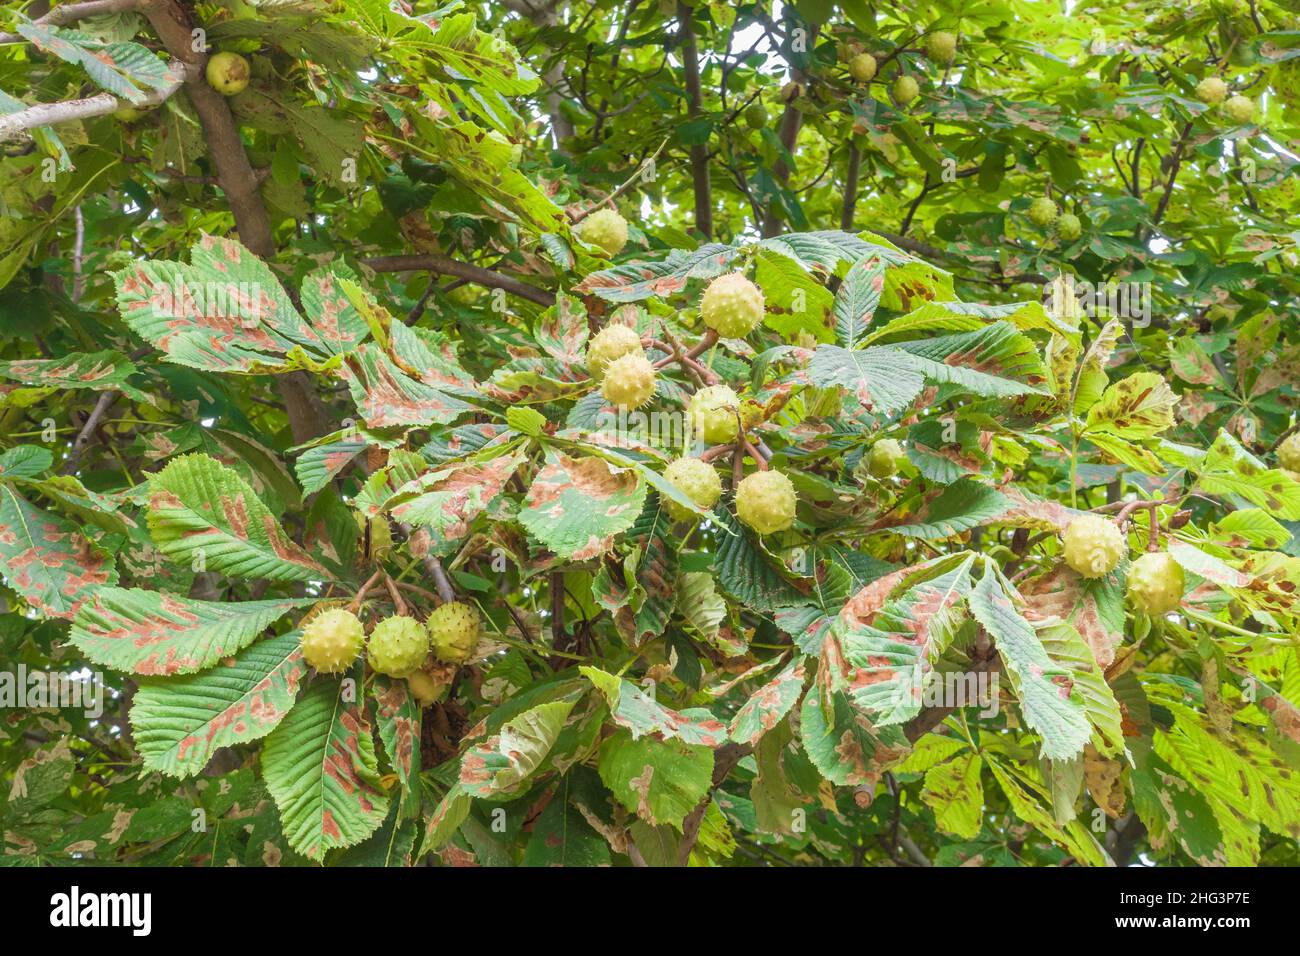 Horse chestnut tree (Aesculus hippocastanum) fruiting with but suffering the effects of Leaf blight. Newark on Trent Nottinghamshire England UK. Septe Stock Photo